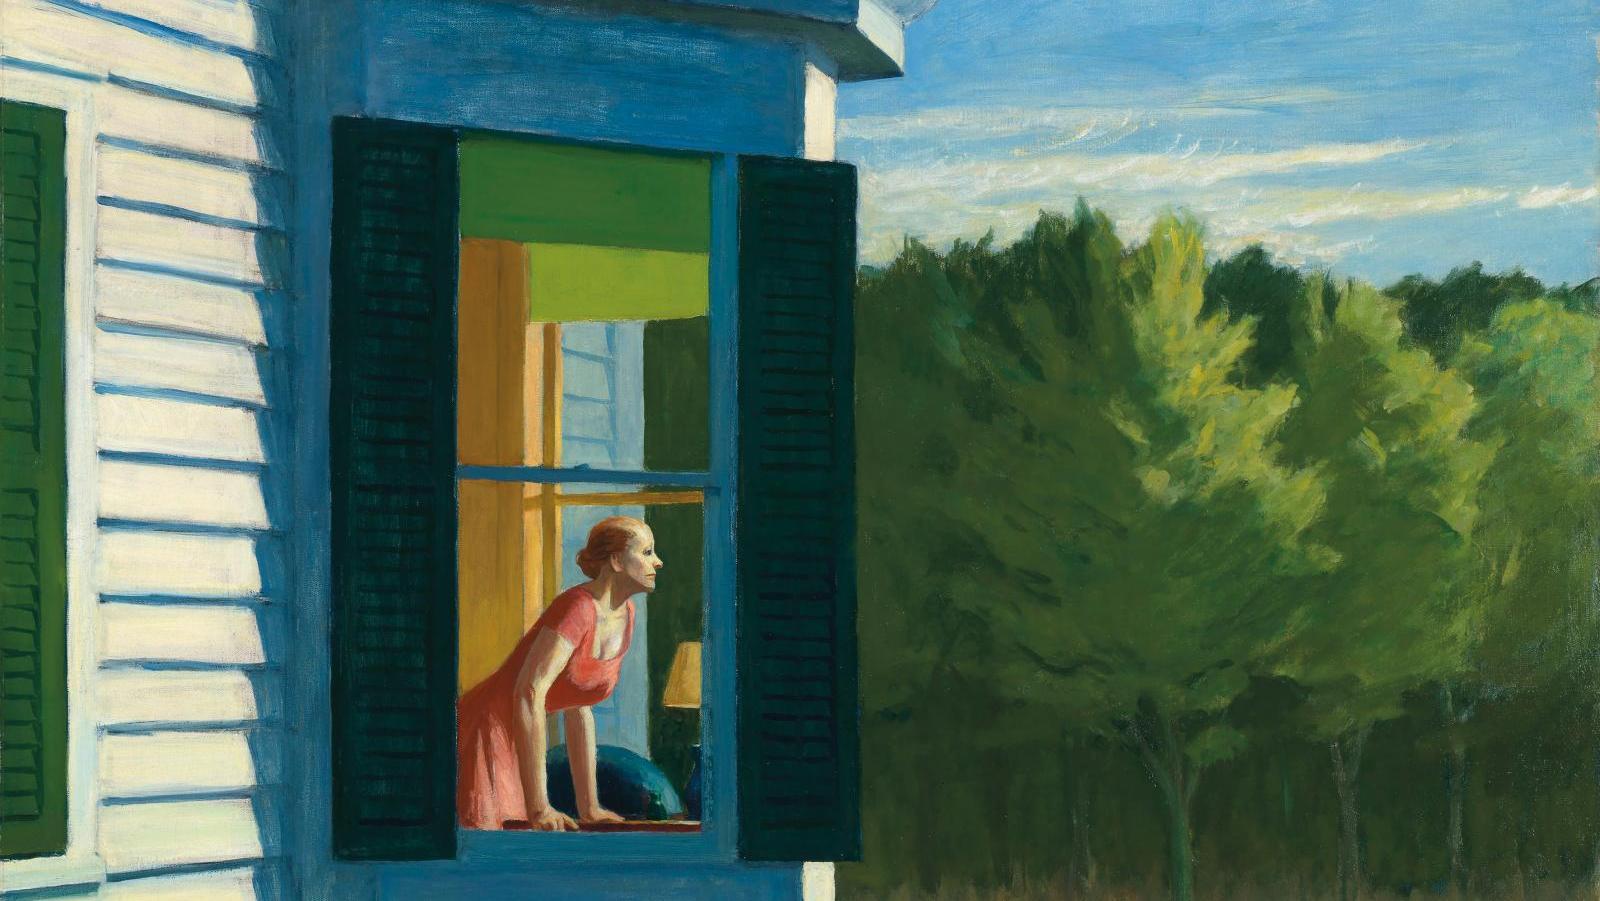 Edward Hopper (1882-1967), Cape Cod Morning, 1950, oil on canvas, 86.7 x 102.3 cm.... Hopper’s Mystery Replayed in Basel